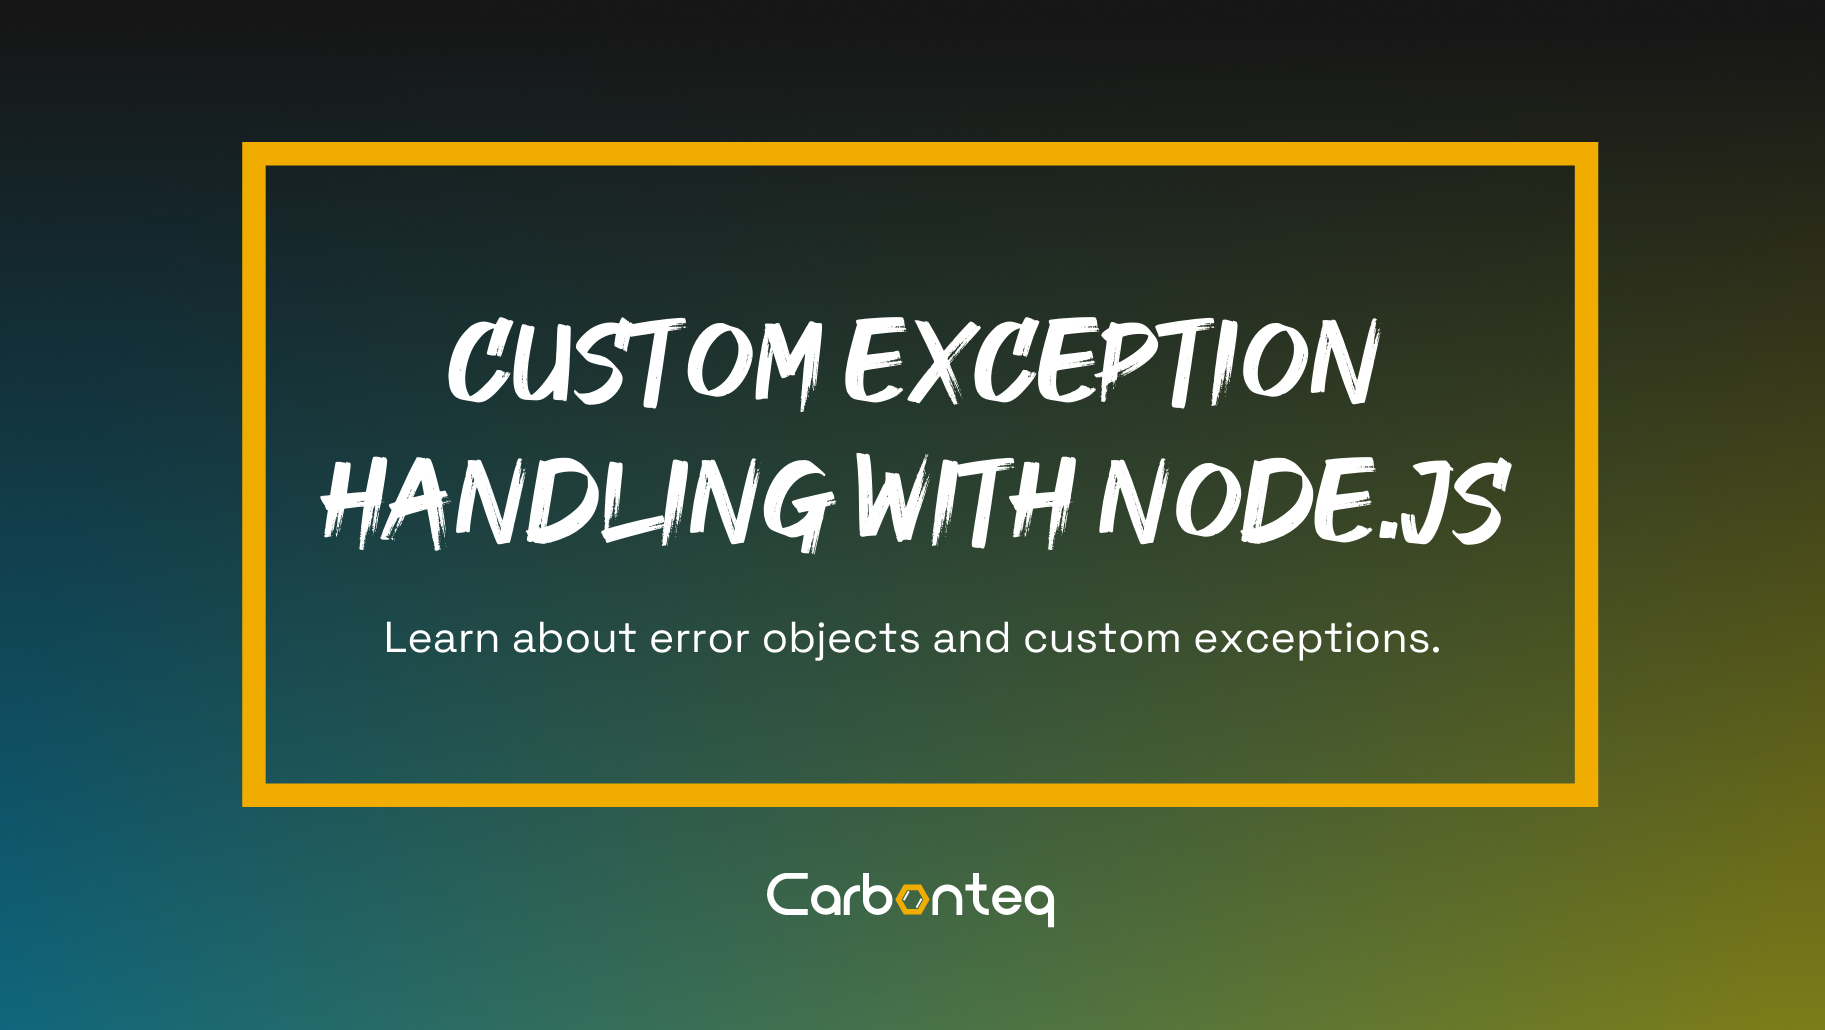 How to handle exceptions in JavaScript 